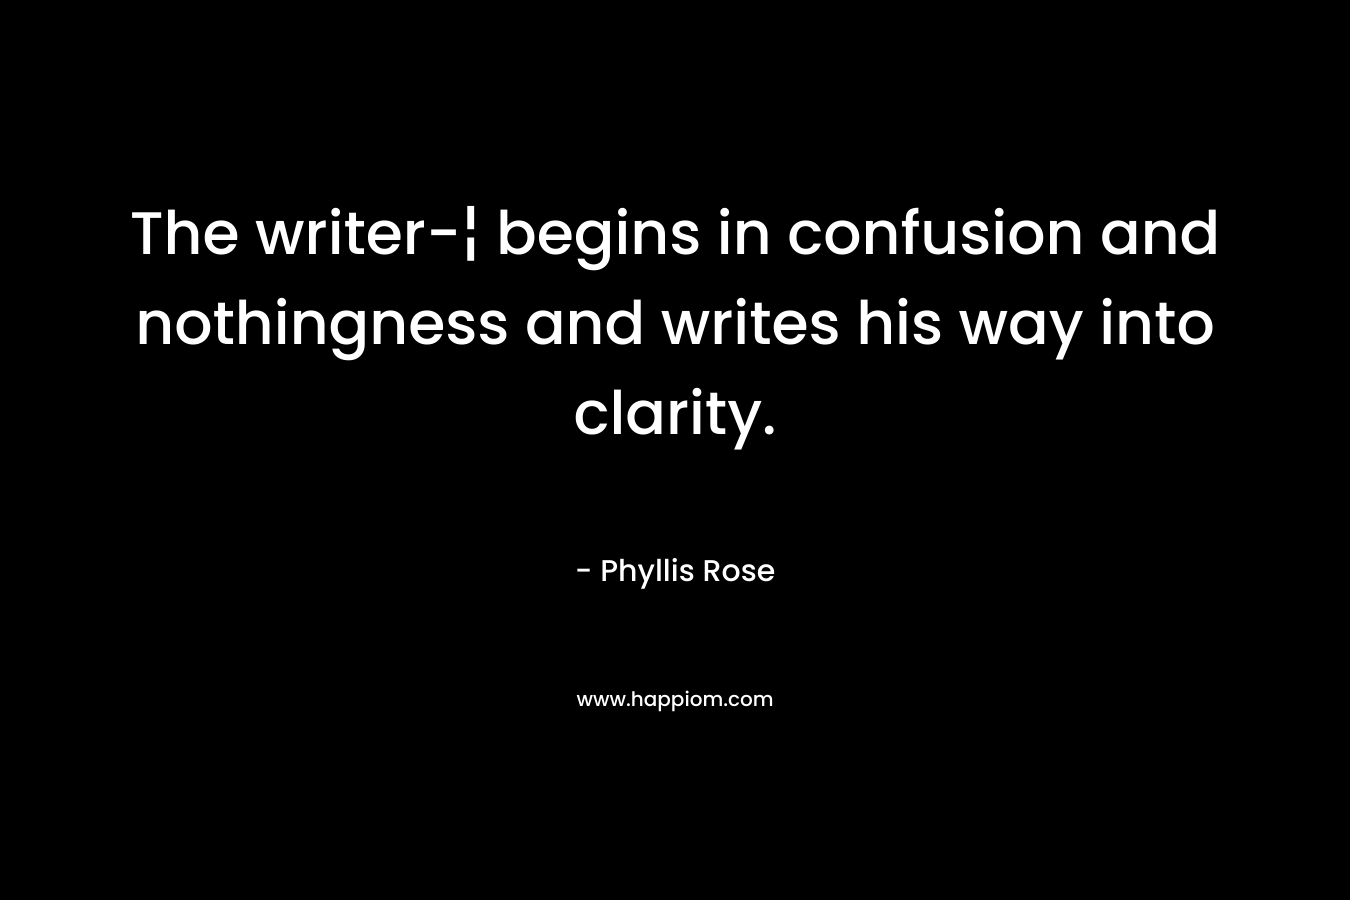 The writer-¦ begins in confusion and nothingness and writes his way into clarity.